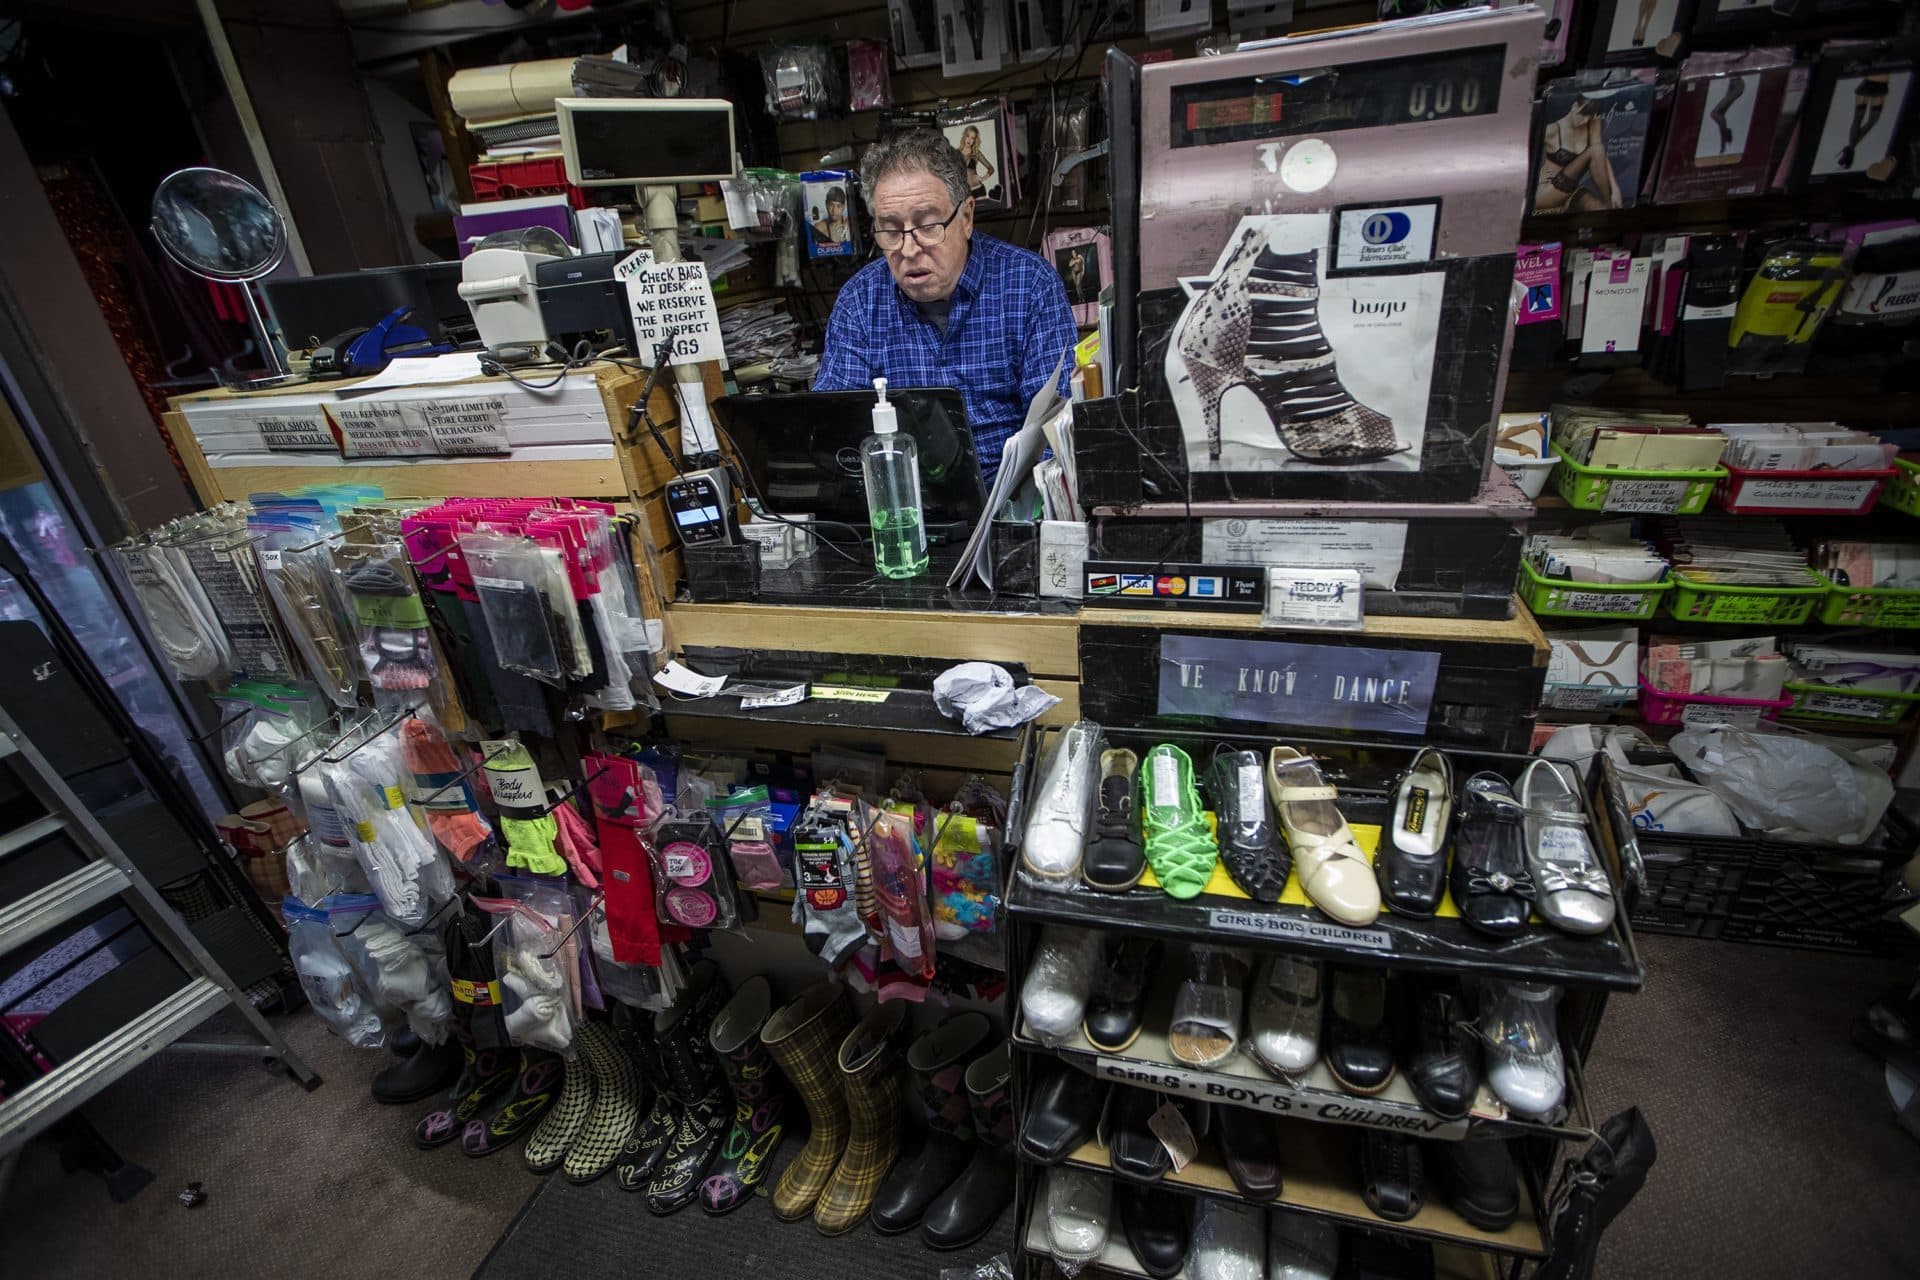 March 23: Teddy’s Shoes owner Steven Adelson sits behind the counter of his store, working on a GoFundMe page. He hopes with the combination of online sales and donations he receives, he will be able to keep his business. (Jesse Costa/WBUR)